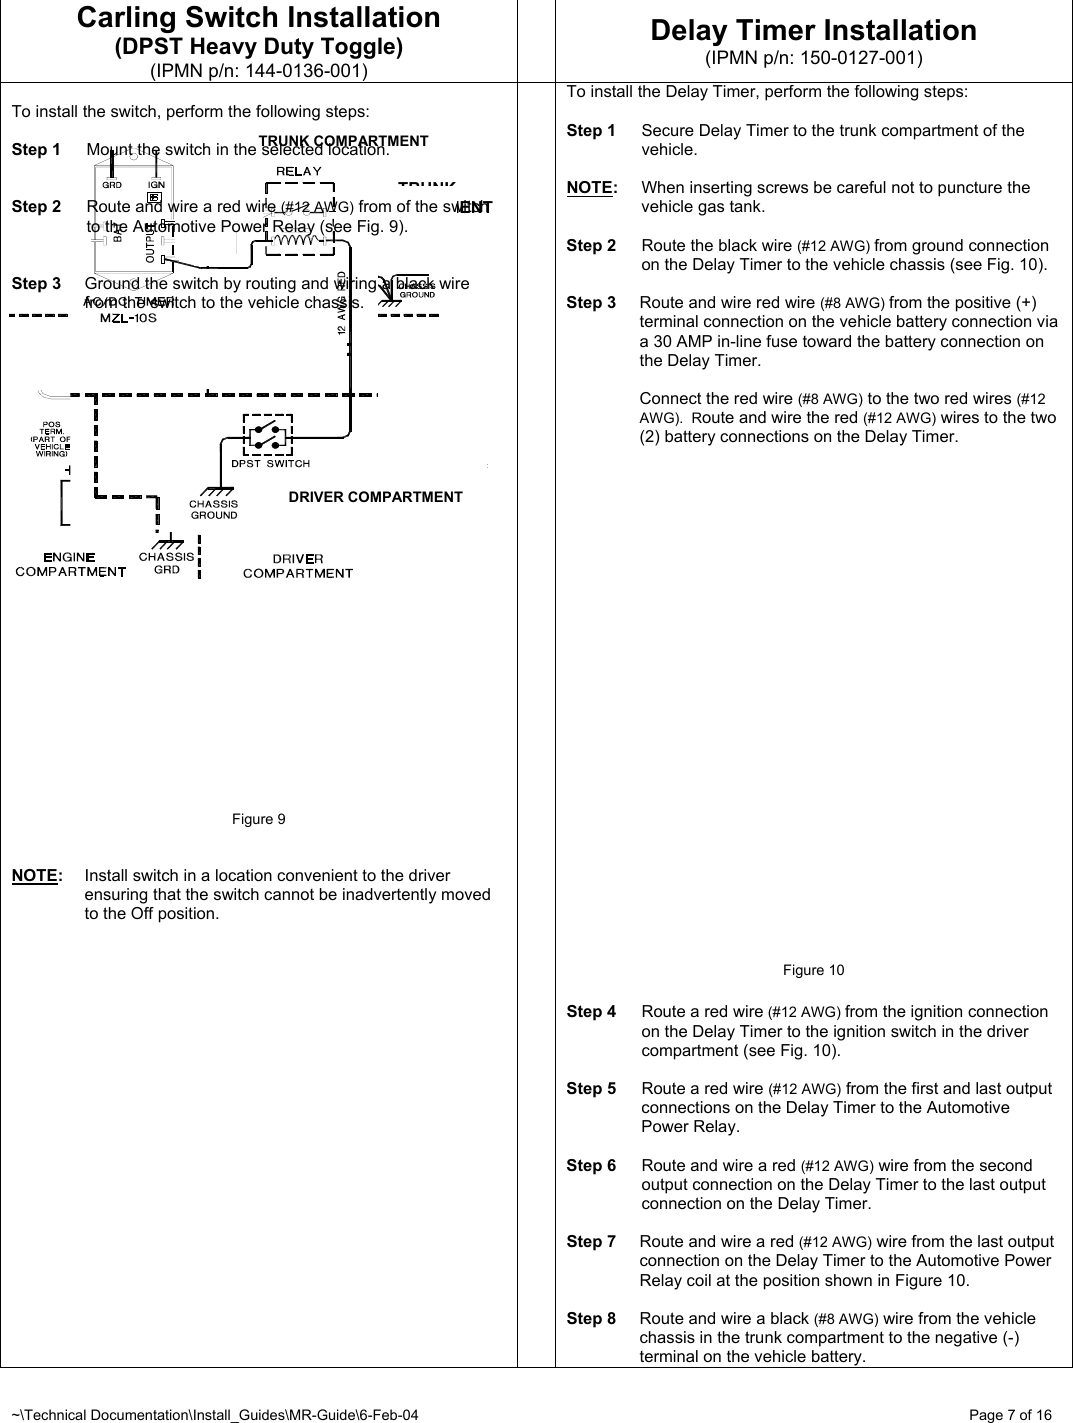 ~\Technical Documentation\Install_Guides\MR-Guide\6-Feb-04   Page 7 of 16 TRUNK COMPARTMENT TRUNK COMPARTMENT DRIVER COMPARTMENT Carling Switch Installation (DPST Heavy Duty Toggle) (IPMN p/n: 144-0136-001)  Delay Timer Installation (IPMN p/n: 150-0127-001)  To install the switch, perform the following steps:  Step 1  Mount the switch in the selected location.   Step 2  Route and wire a red wire (#12 AWG) from of the switch to the Automotive Power Relay (see Fig. 9).   Step 3  Ground the switch by routing and wiring a black wire from the switch to the vehicle chassis.                            Figure 9   NOTE:  Install switch in a location convenient to the driver ensuring that the switch cannot be inadvertently moved to the Off position.  To install the Delay Timer, perform the following steps:  Step 1  Secure Delay Timer to the trunk compartment of the vehicle.  NOTE:  When inserting screws be careful not to puncture the vehicle gas tank.  Step 2  Route the black wire (#12 AWG) from ground connection on the Delay Timer to the vehicle chassis (see Fig. 10).  Step 3  Route and wire red wire (#8 AWG) from the positive (+) terminal connection on the vehicle battery connection via a 30 AMP in-line fuse toward the battery connection on the Delay Timer.    Connect the red wire (#8 AWG) to the two red wires (#12 AWG).  Route and wire the red (#12 AWG) wires to the two (2) battery connections on the Delay Timer.                       Figure 10  Step 4  Route a red wire (#12 AWG) from the ignition connection on the Delay Timer to the ignition switch in the driver compartment (see Fig. 10).  Step 5  Route a red wire (#12 AWG) from the first and last output connections on the Delay Timer to the Automotive Power Relay.  Step 6  Route and wire a red (#12 AWG) wire from the second output connection on the Delay Timer to the last output connection on the Delay Timer.   Step 7  Route and wire a red (#12 AWG) wire from the last output connection on the Delay Timer to the Automotive Power Relay coil at the position shown in Figure 10.  Step 8  Route and wire a black (#8 AWG) wire from the vehicle chassis in the trunk compartment to the negative (-) terminal on the vehicle battery. 